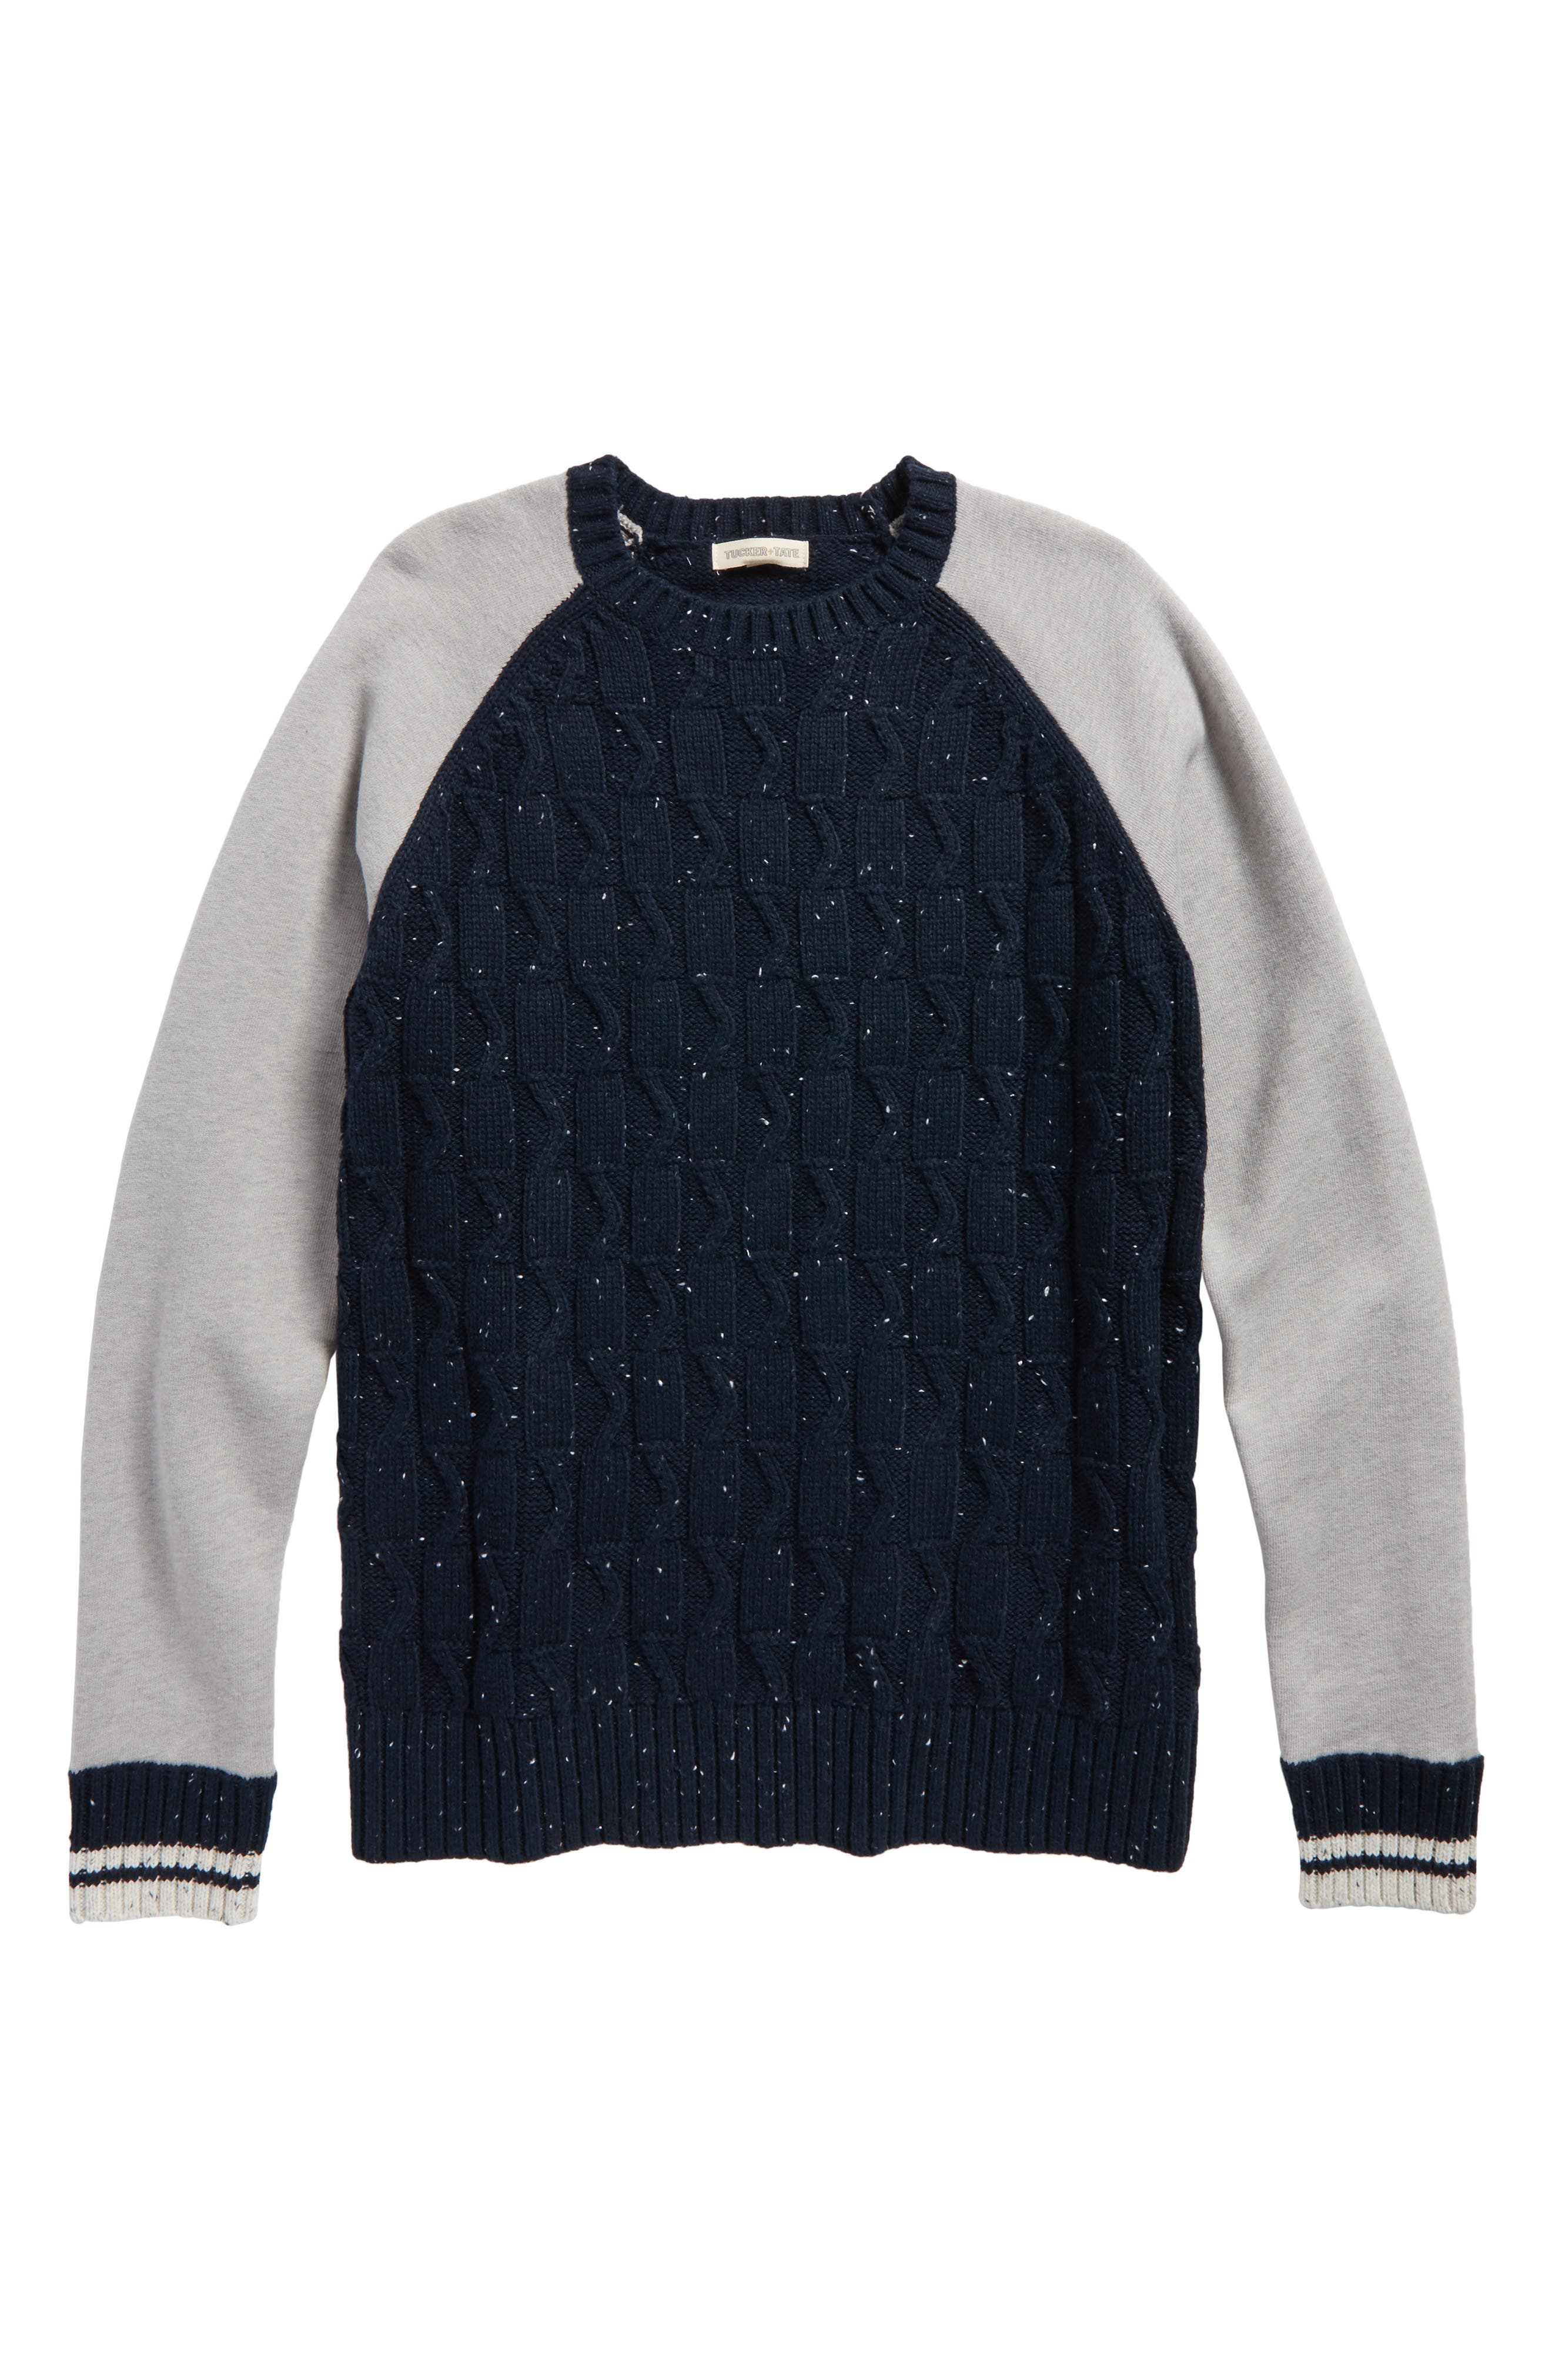 Tucker + Tate Mixed Media Sweater in Navy Carbon